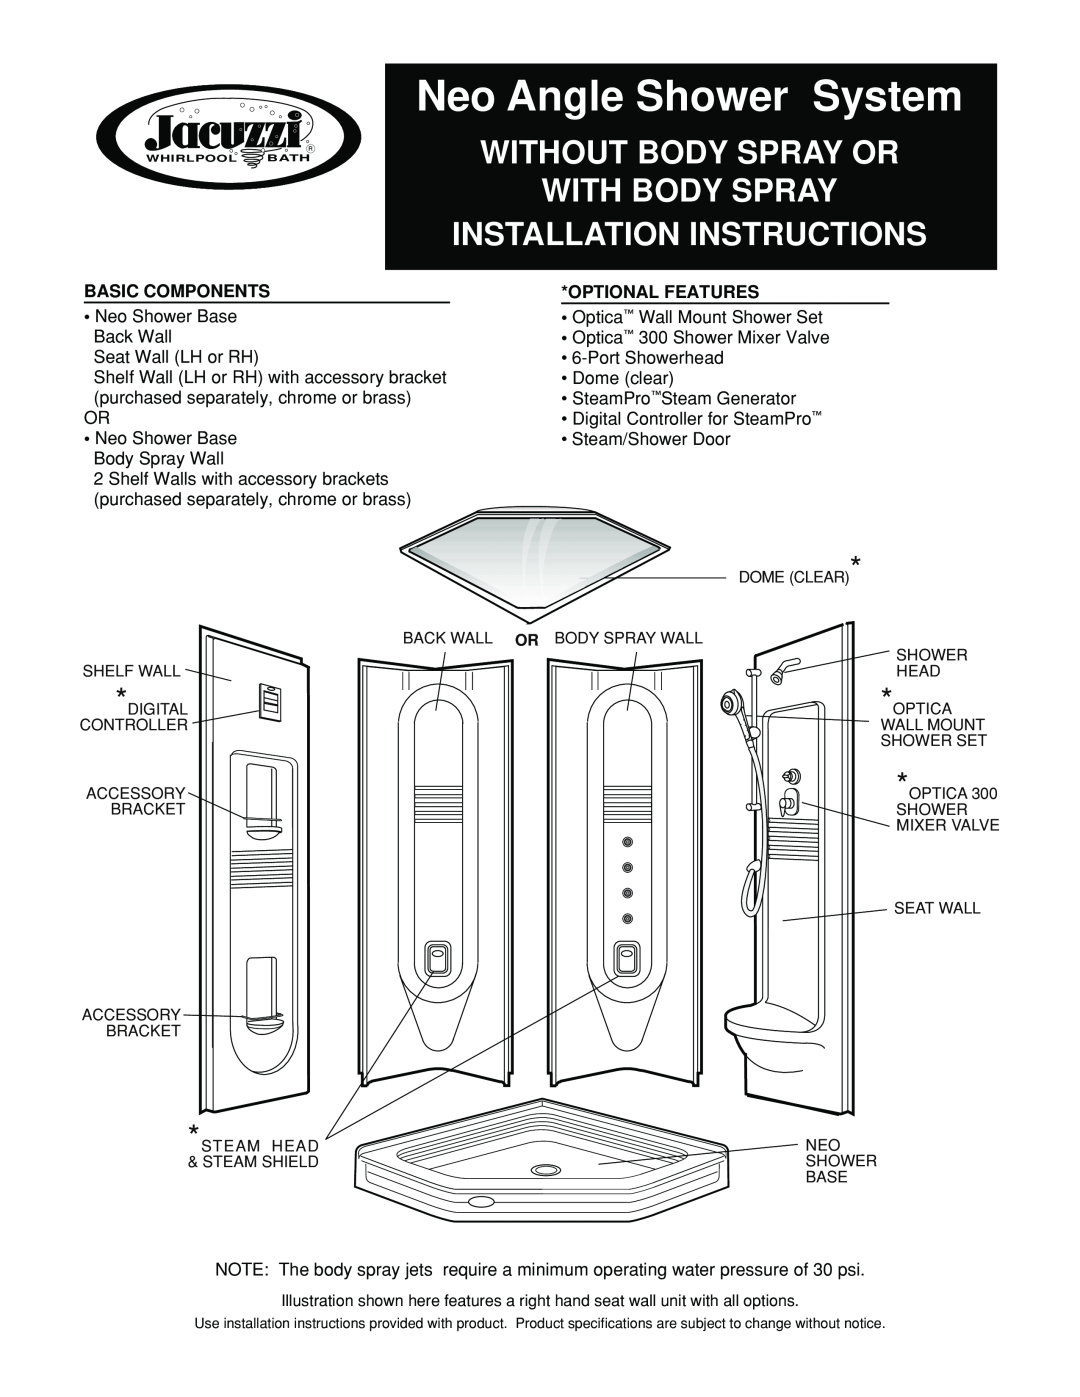 Jacuzzi Neo Angle Shower System installation instructions Basic Components, Optional Features 